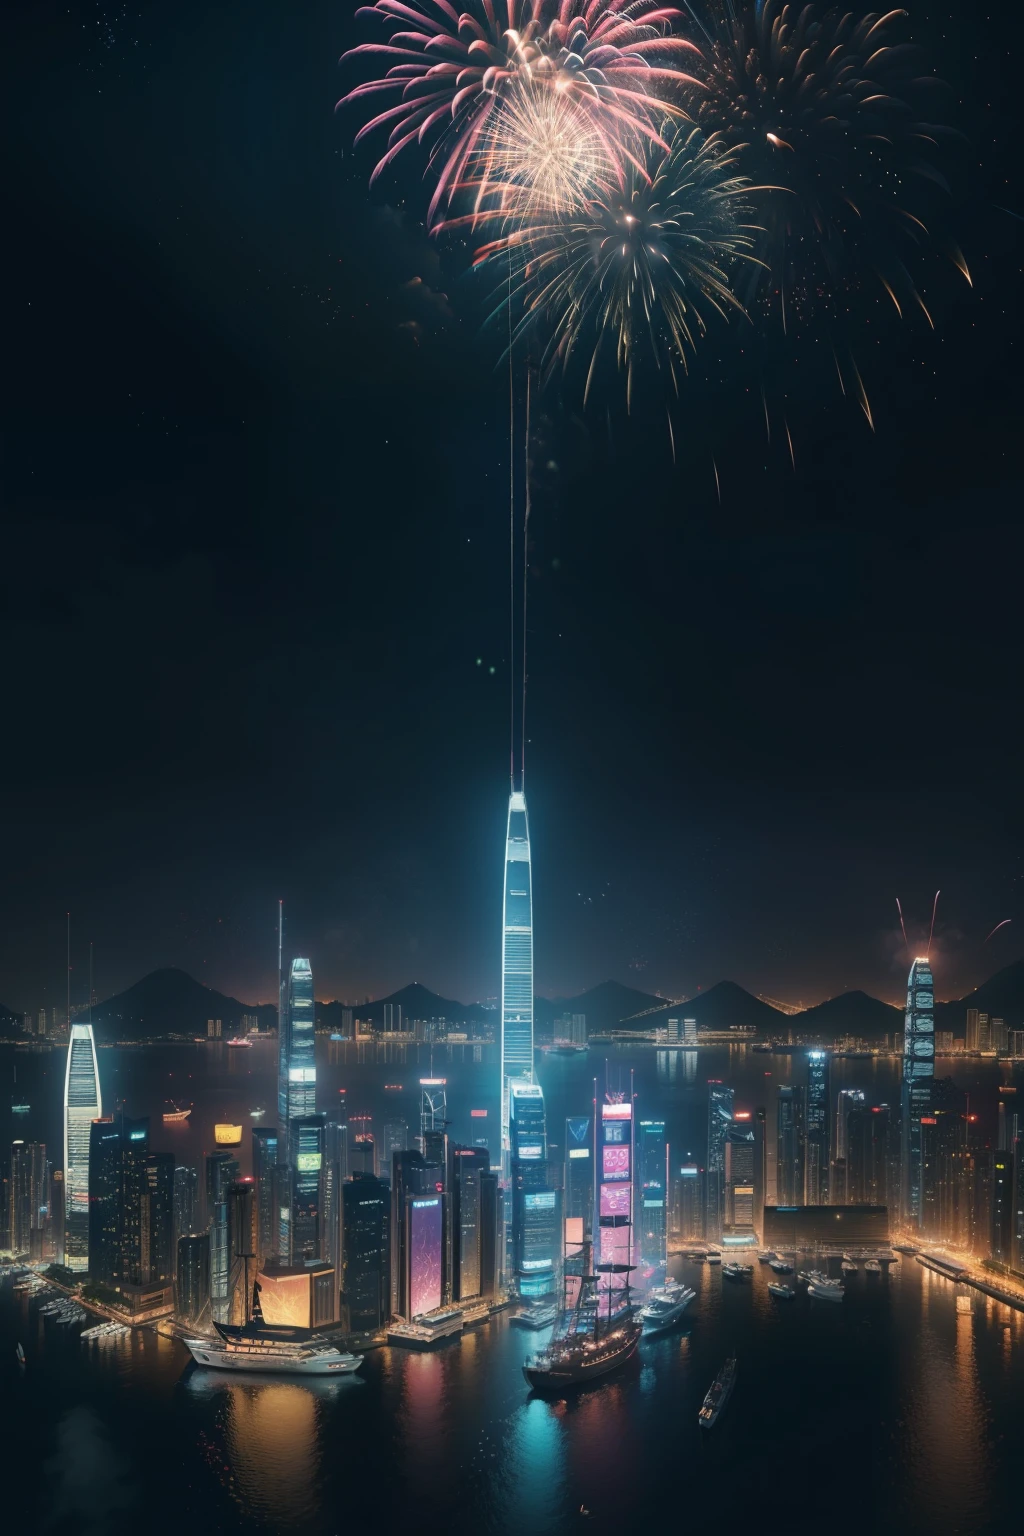 fireworks over the city at night with boats and ships, cyberpunk art by Patrick Ching, trending on cgsociety, digital art, beautiful cityscape, 4k highly detailed digital art, city like hong kong, hd anime cityscape, beautiful digital artwork, beautiful city of the future, ross tran. scenic background, 8 k resolution digital painting, 8k resolution digital painting